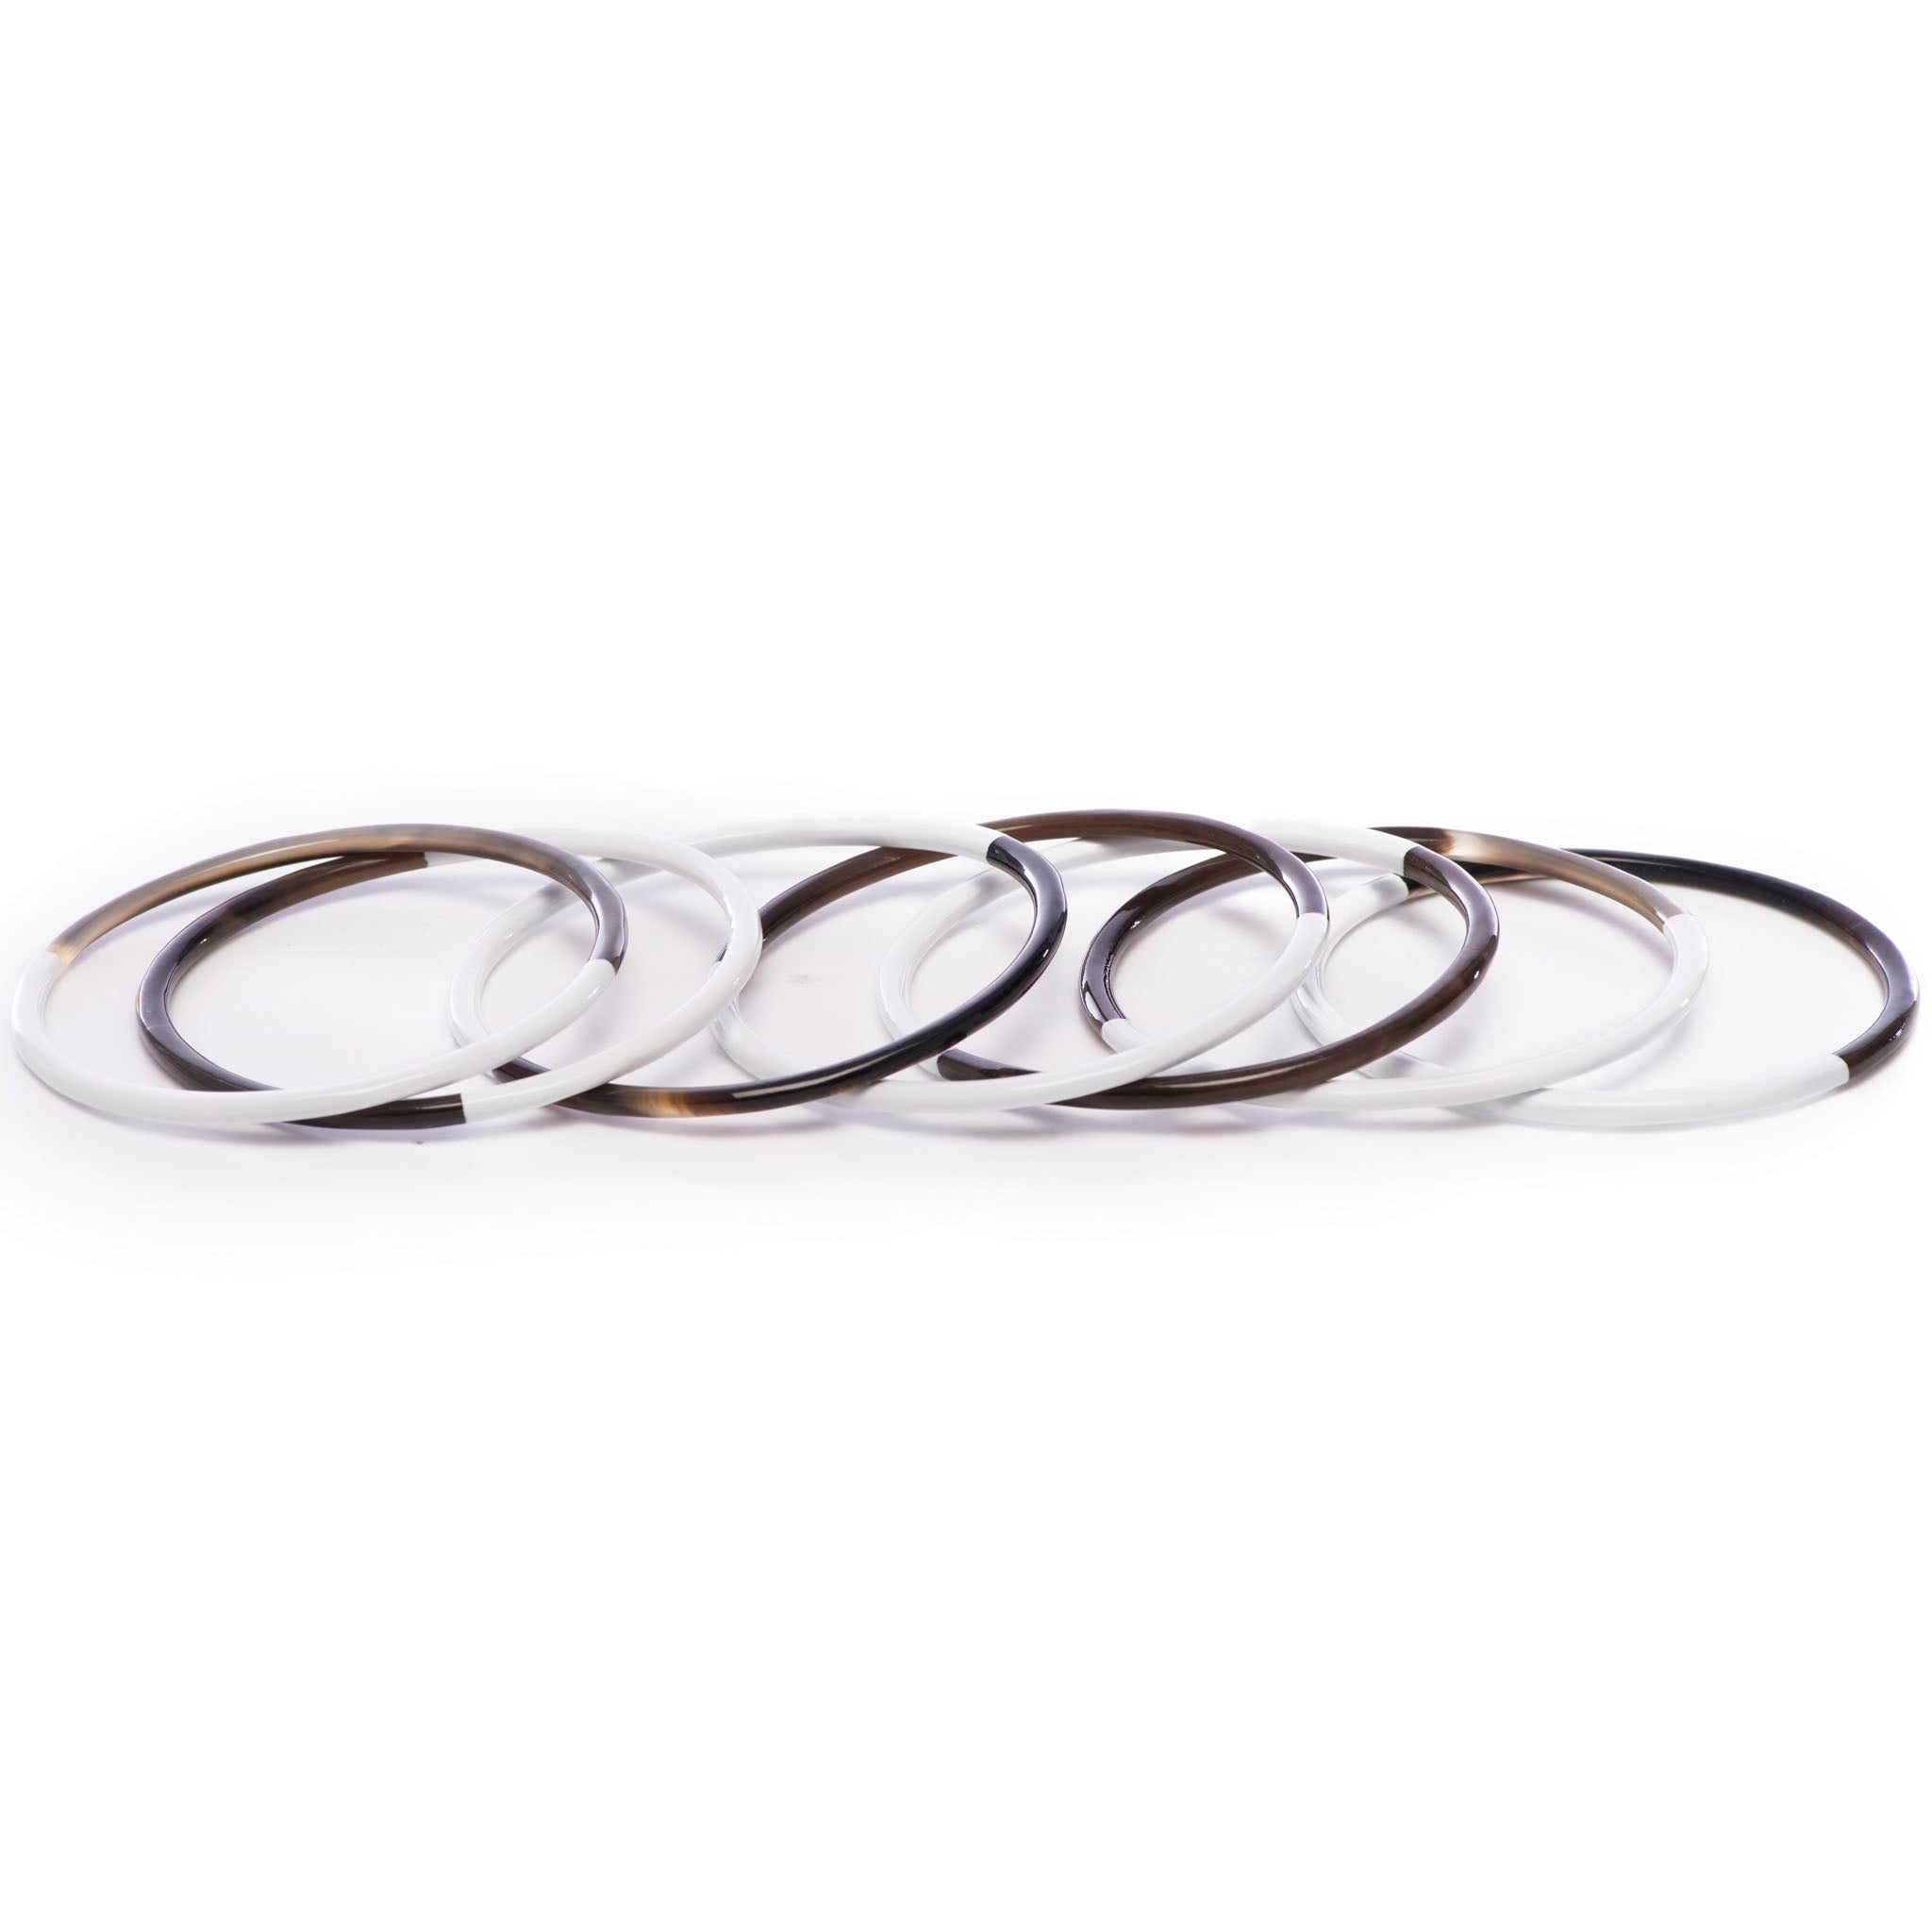 Horn Bangle Set With Lacquer